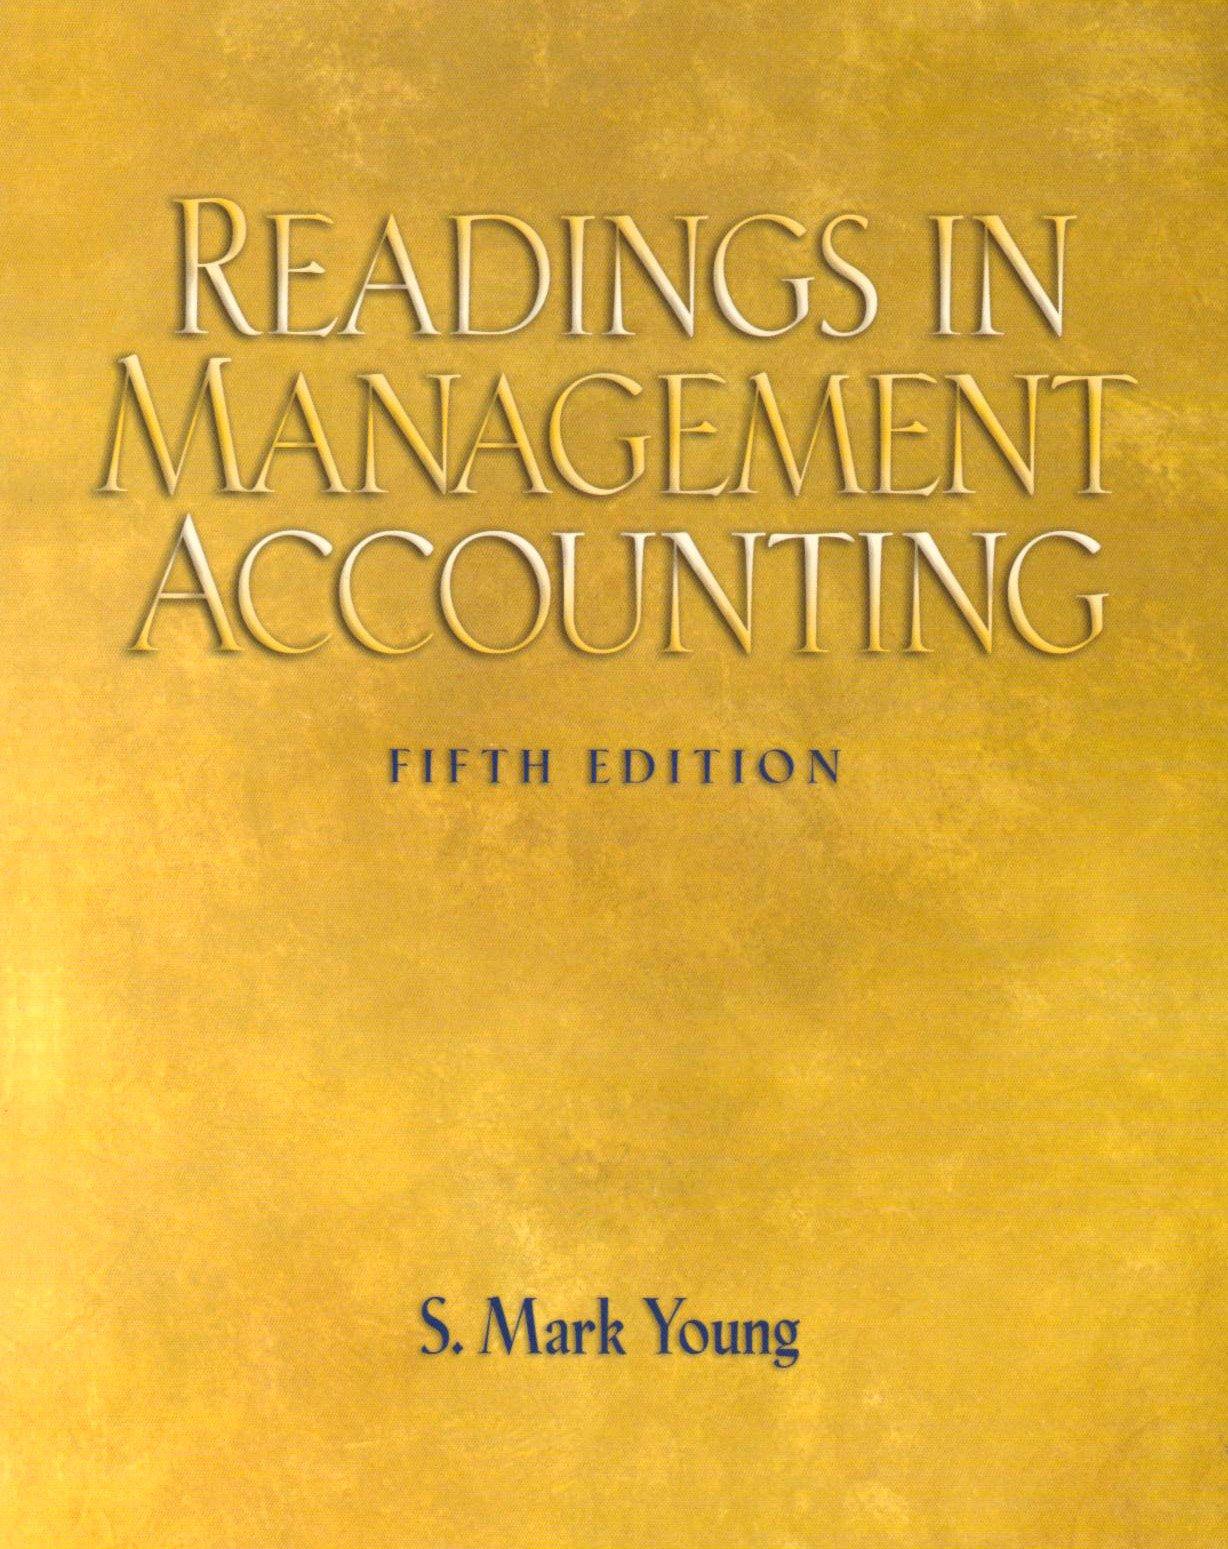 readings in management accounting 5th edition s. mark young 0132280221, 978-0132280228